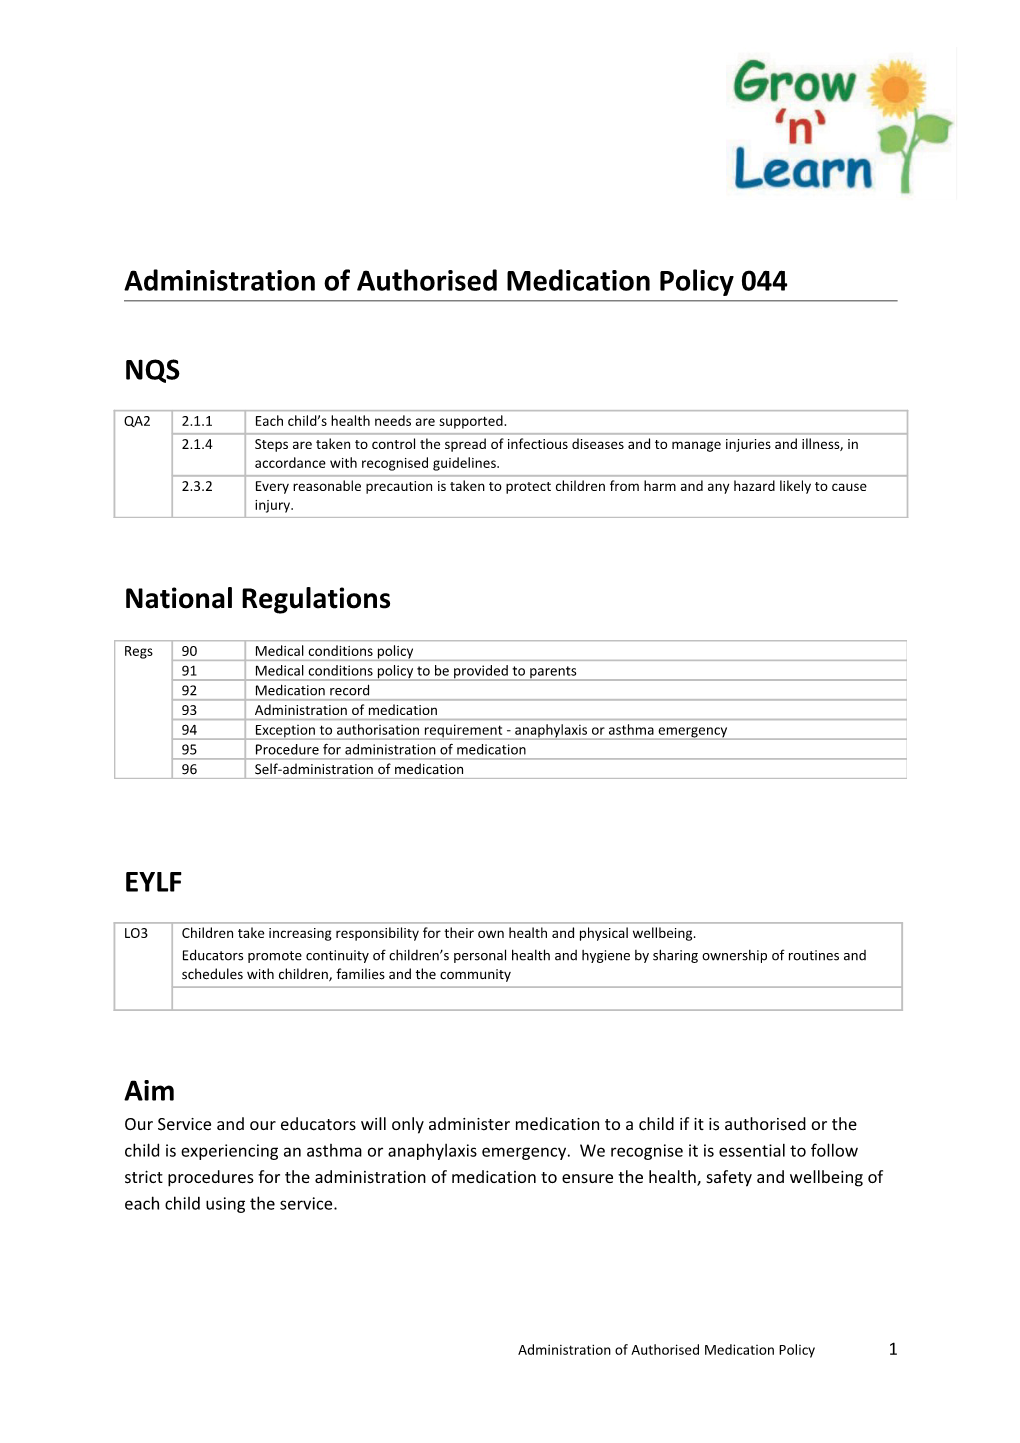 Administration of Authorised Medication Policy044